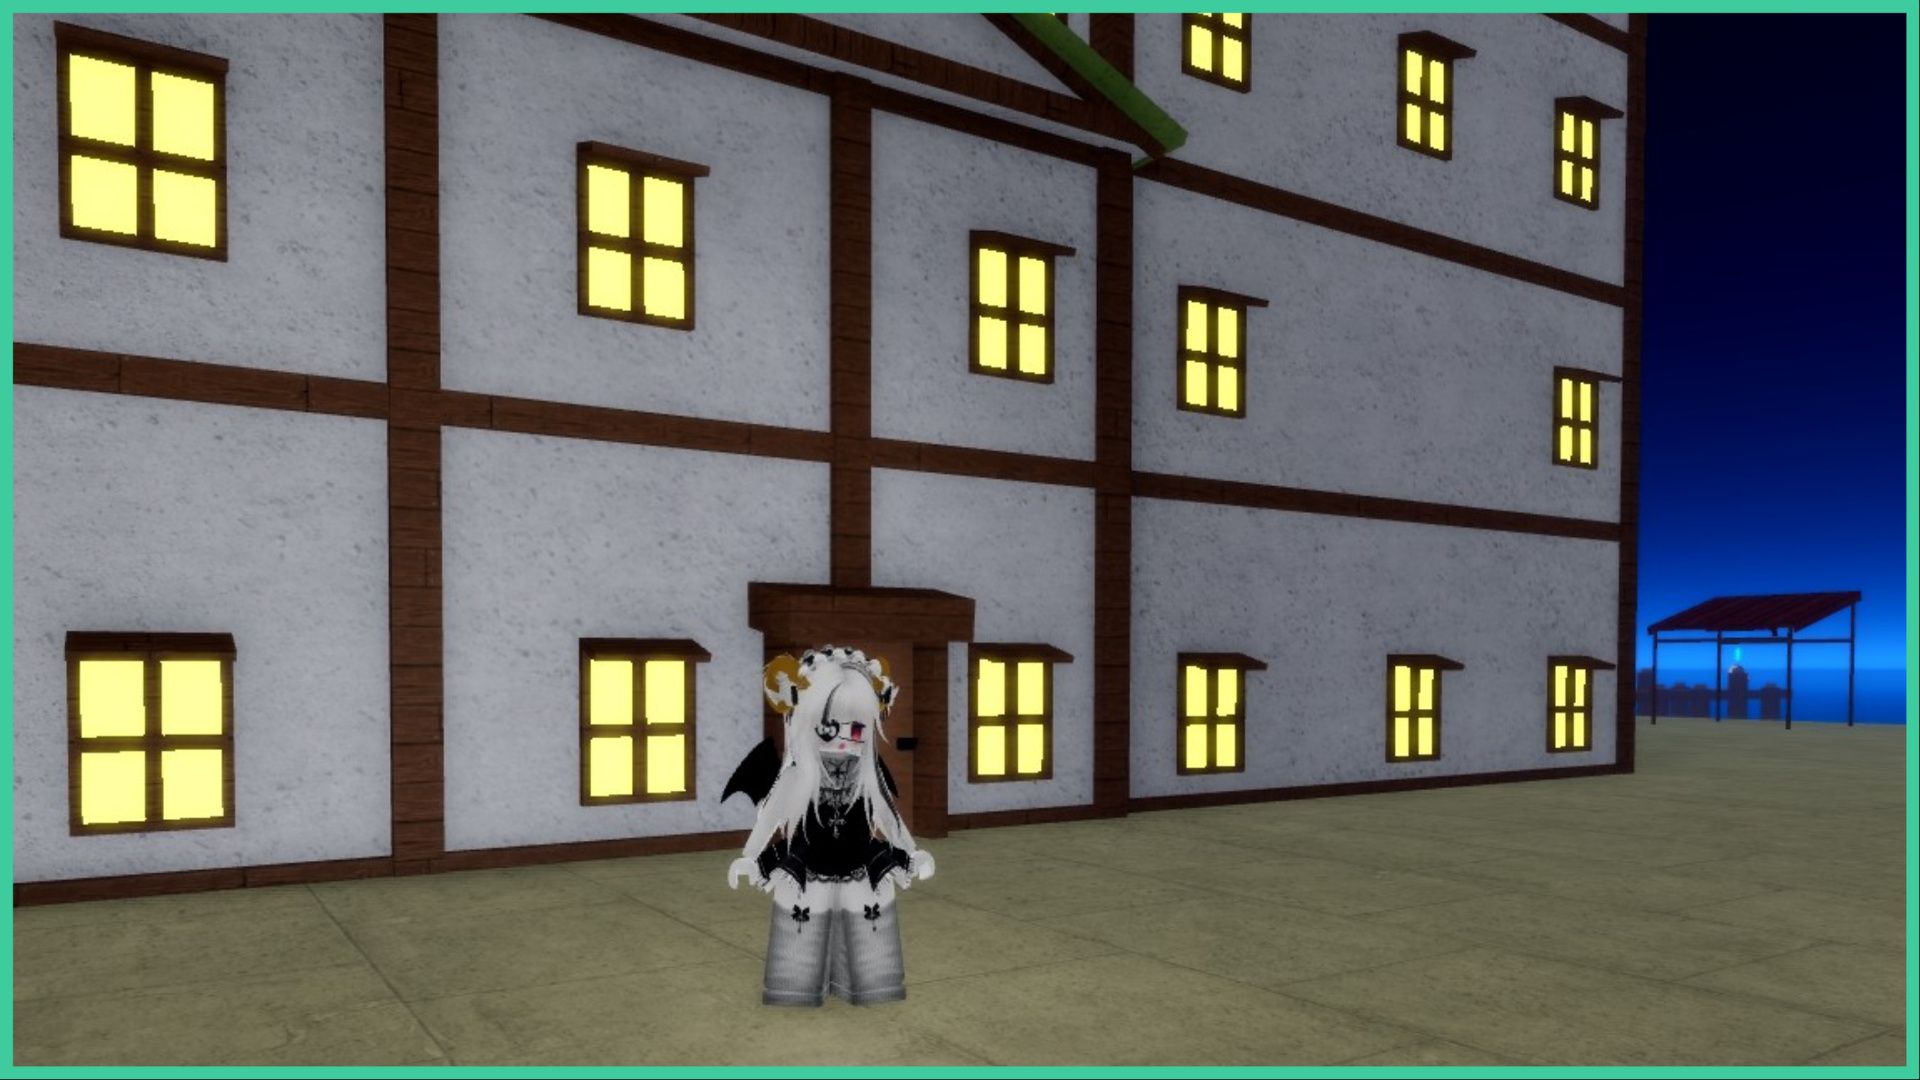 feature image for our demon piece fruit guide, the image is of a roblox player with ram horns standing in front of a building with multiple windows, all of which have the lights on inside, you can slightly see the ocean in the distance to the right and a shelter that is built close to the docks